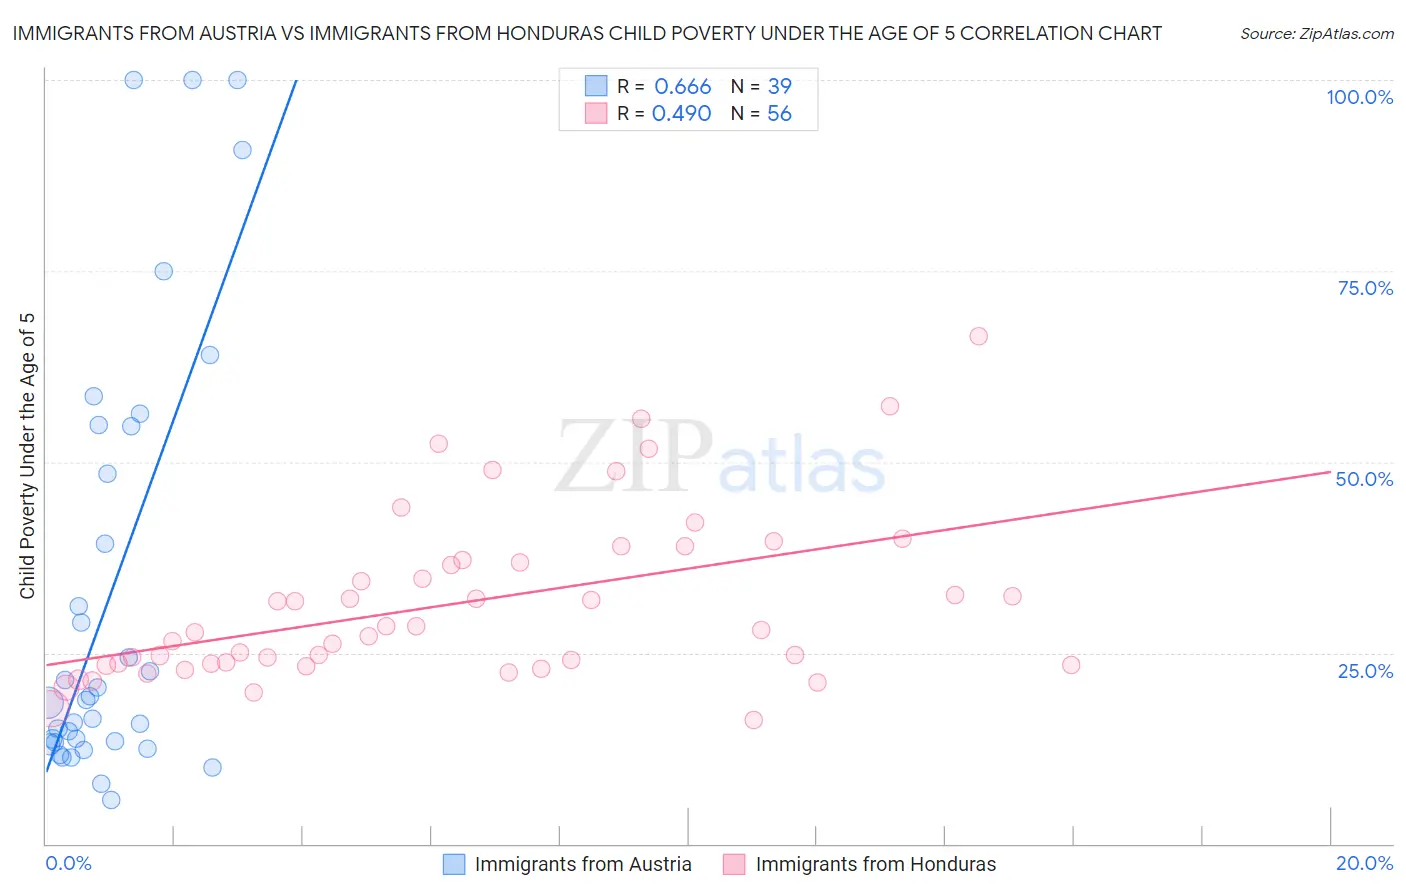 Immigrants from Austria vs Immigrants from Honduras Child Poverty Under the Age of 5